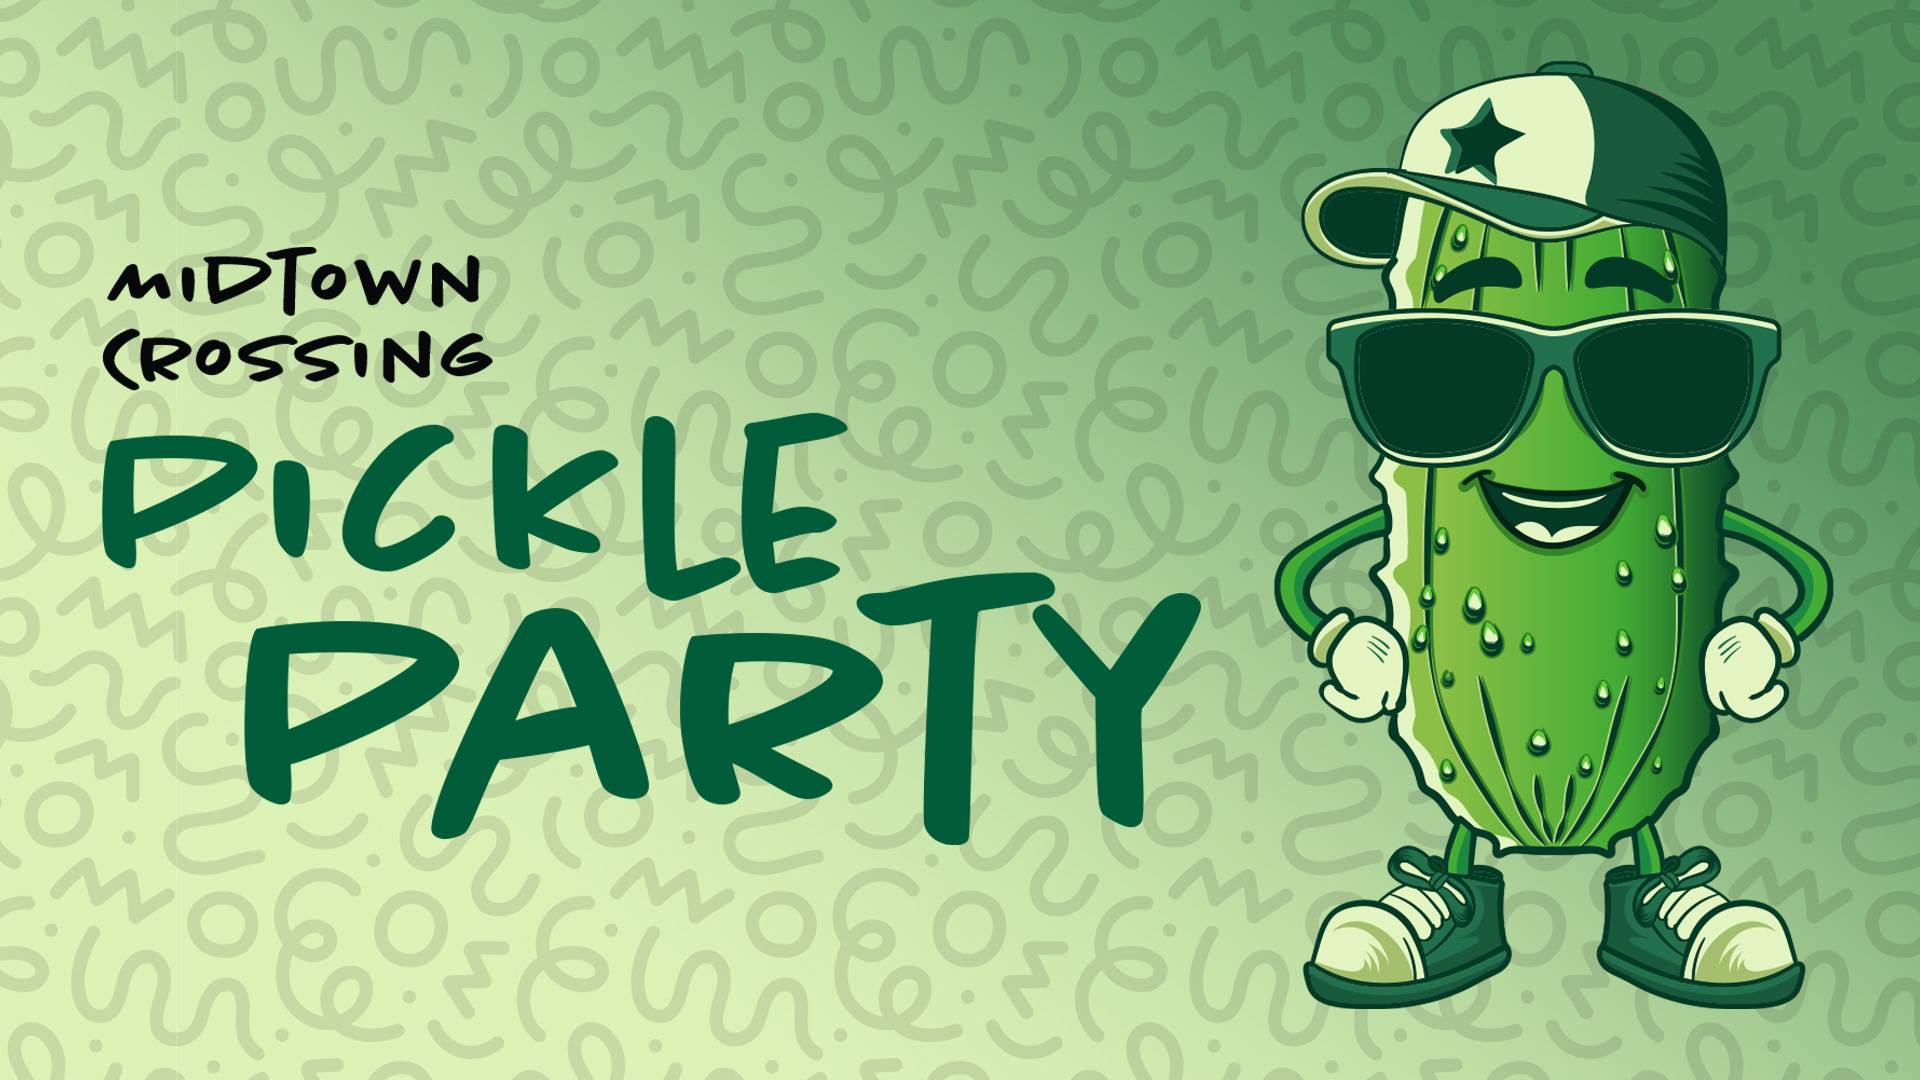 Pickle Party logo at Midtown Crossing in Omaha, NE